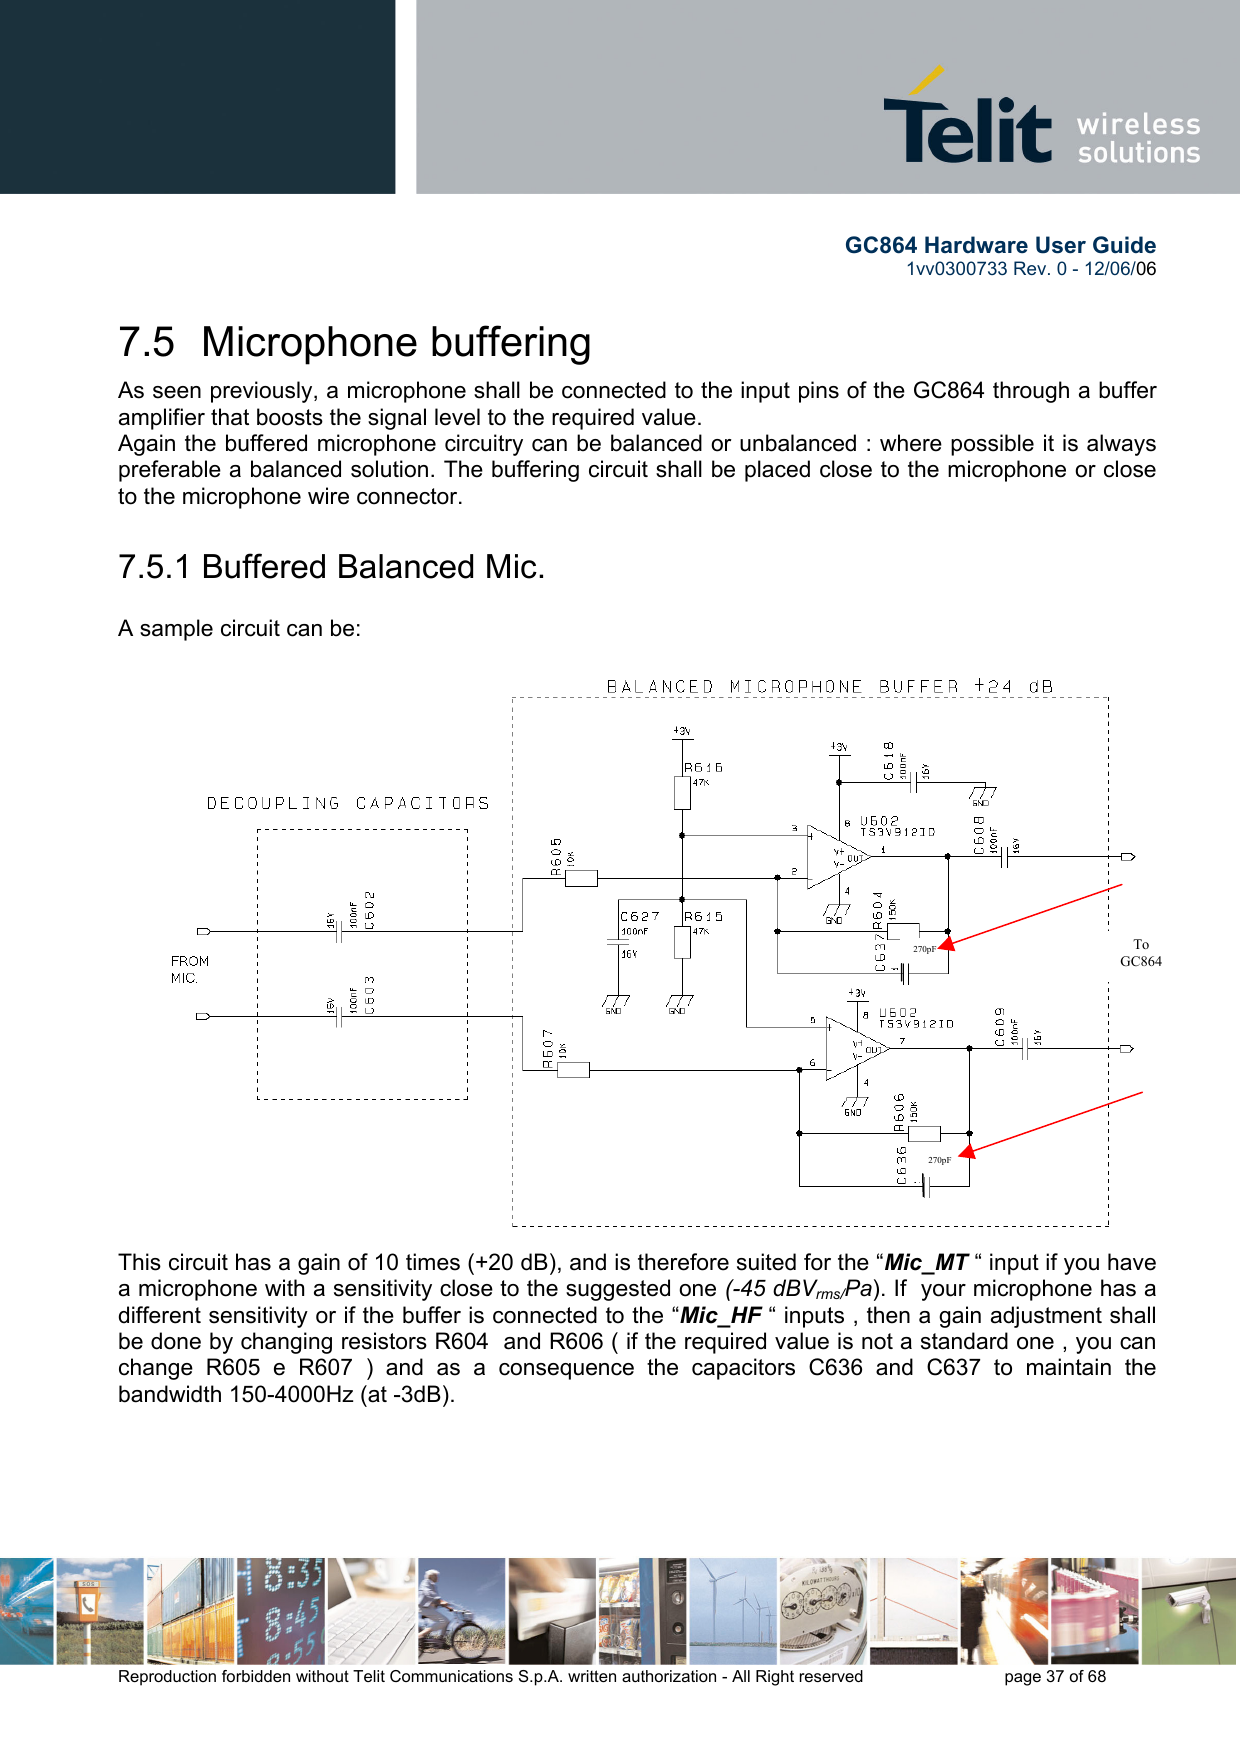        GC864 Hardware User Guide  1vv0300733 Rev. 0 - 12/06/06  Reproduction forbidden without Telit Communications S.p.A. written authorization - All Right reserved    page 37 of 68  7.5 Microphone buffering As seen previously, a microphone shall be connected to the input pins of the GC864 through a buffer amplifier that boosts the signal level to the required value. Again the buffered microphone circuitry can be balanced or unbalanced : where possible it is always preferable a balanced solution. The buffering circuit shall be placed close to the microphone or close to the microphone wire connector. 7.5.1 Buffered Balanced Mic.  A sample circuit can be: This circuit has a gain of 10 times (+20 dB), and is therefore suited for the “Mic_MT “ input if you have a microphone with a sensitivity close to the suggested one (-45 dBVrms/Pa). If  your microphone has a different sensitivity or if the buffer is connected to the “Mic_HF “ inputs , then a gain adjustment shall be done by changing resistors R604  and R606 ( if the required value is not a standard one , you can change R605 e R607 ) and as a consequence the capacitors C636 and C637 to maintain the bandwidth 150-4000Hz (at -3dB).  To GC864 270pF  270pF 